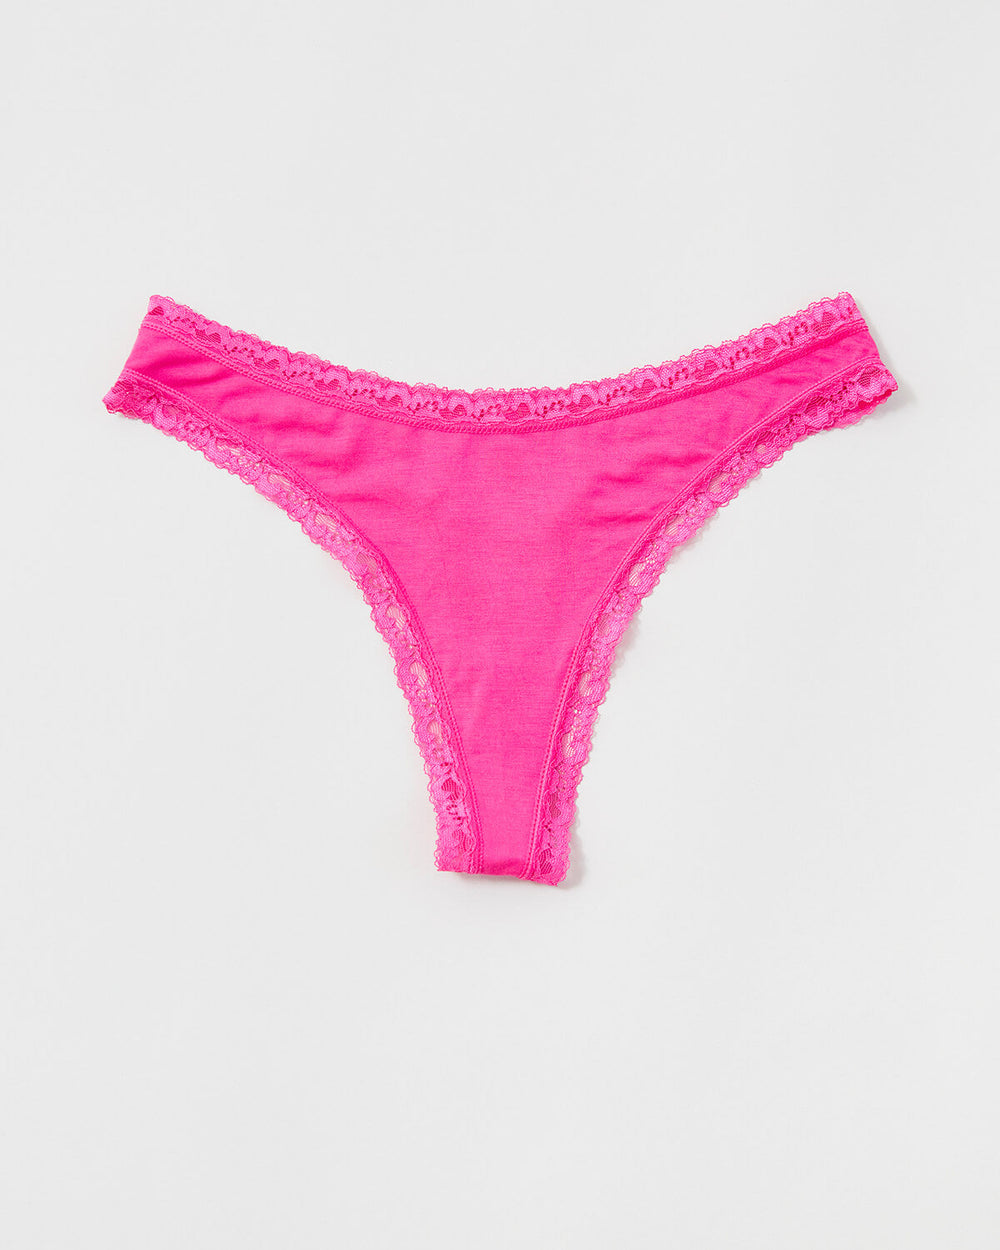 Victoria's Secret: FREE Pink Bra with 10 Panties Purchase – Starts